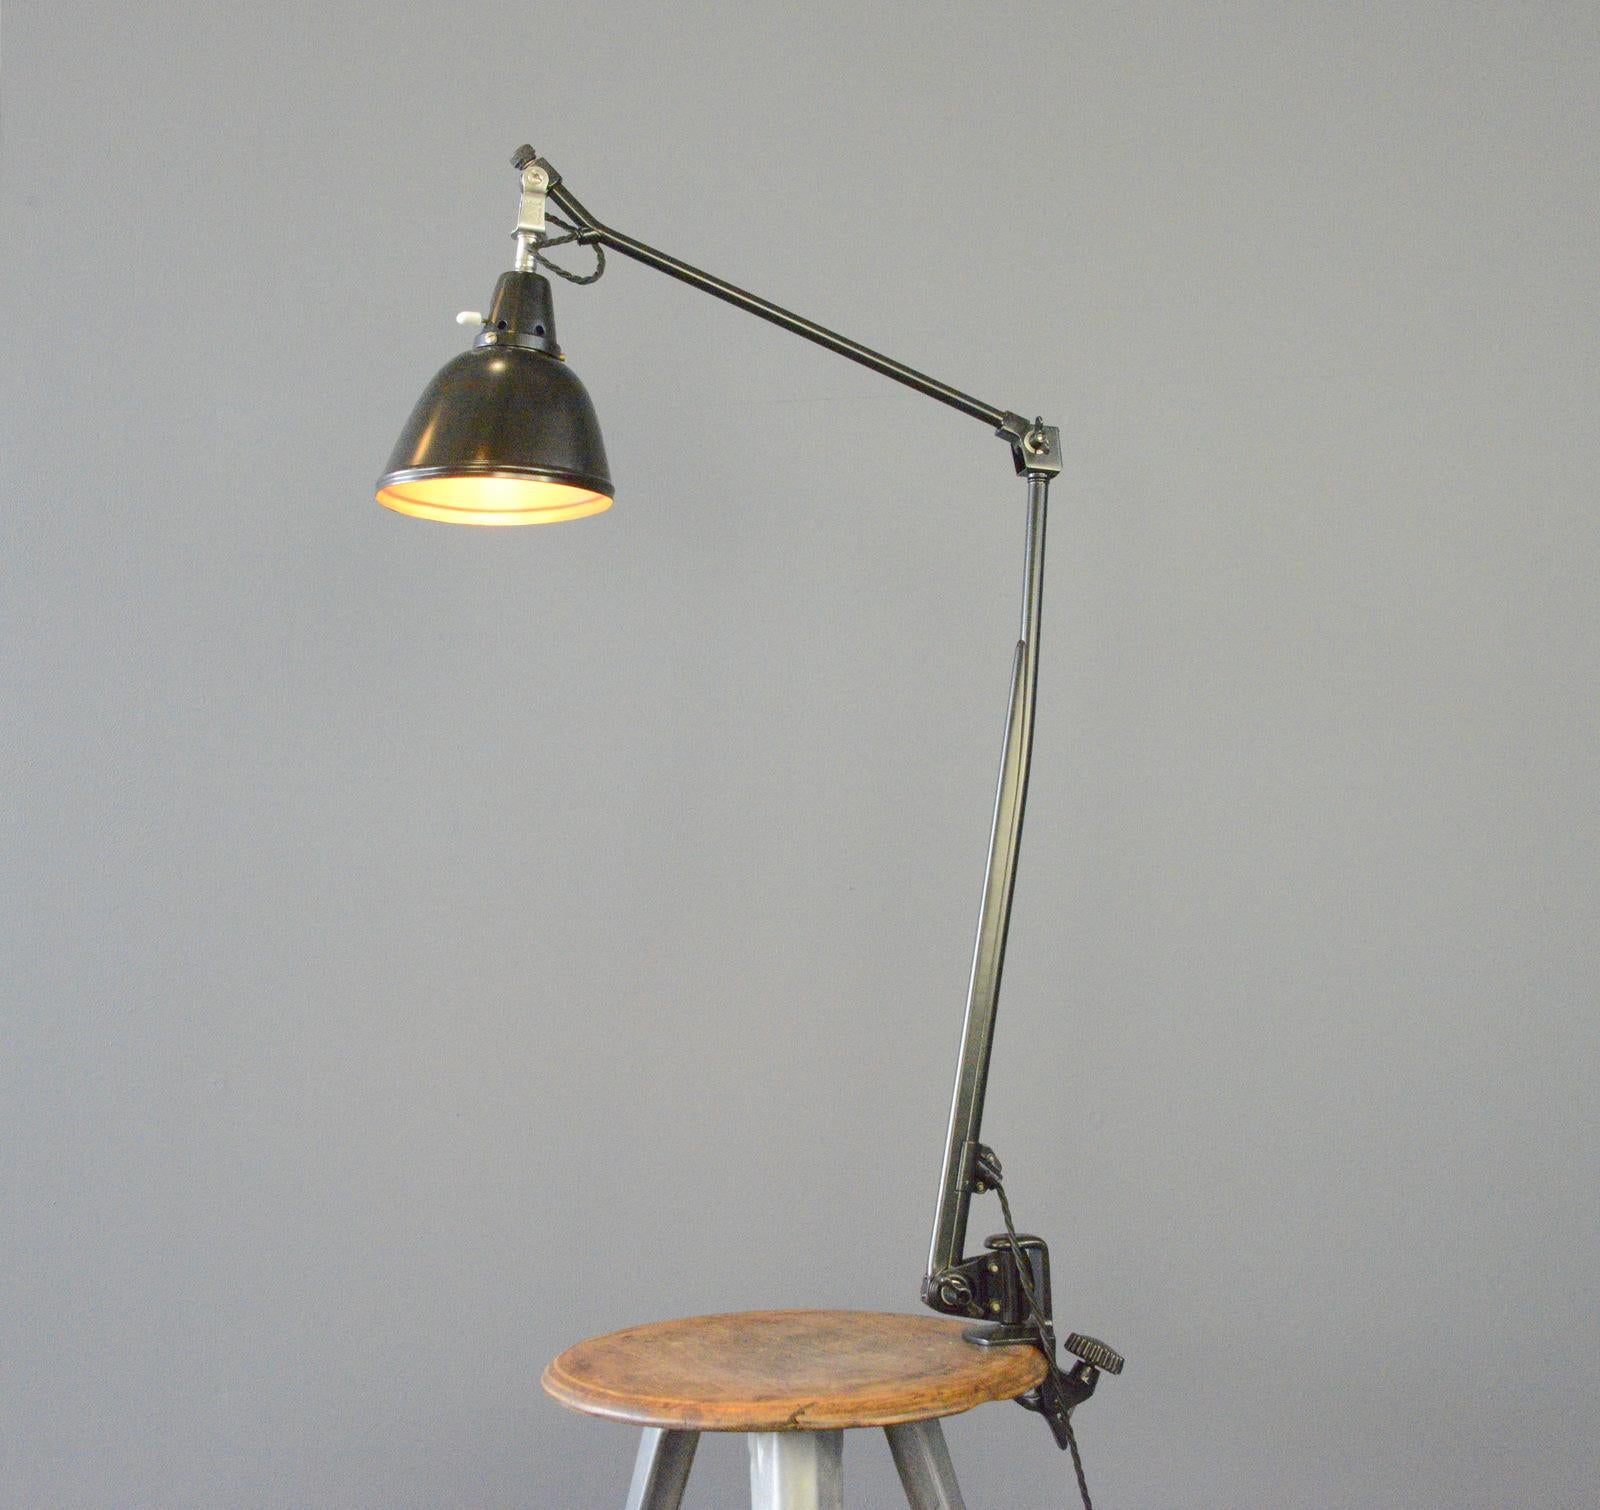 German Midgard Typ 114 Table Lamp By Curt Fischer Circa 1930s For Sale